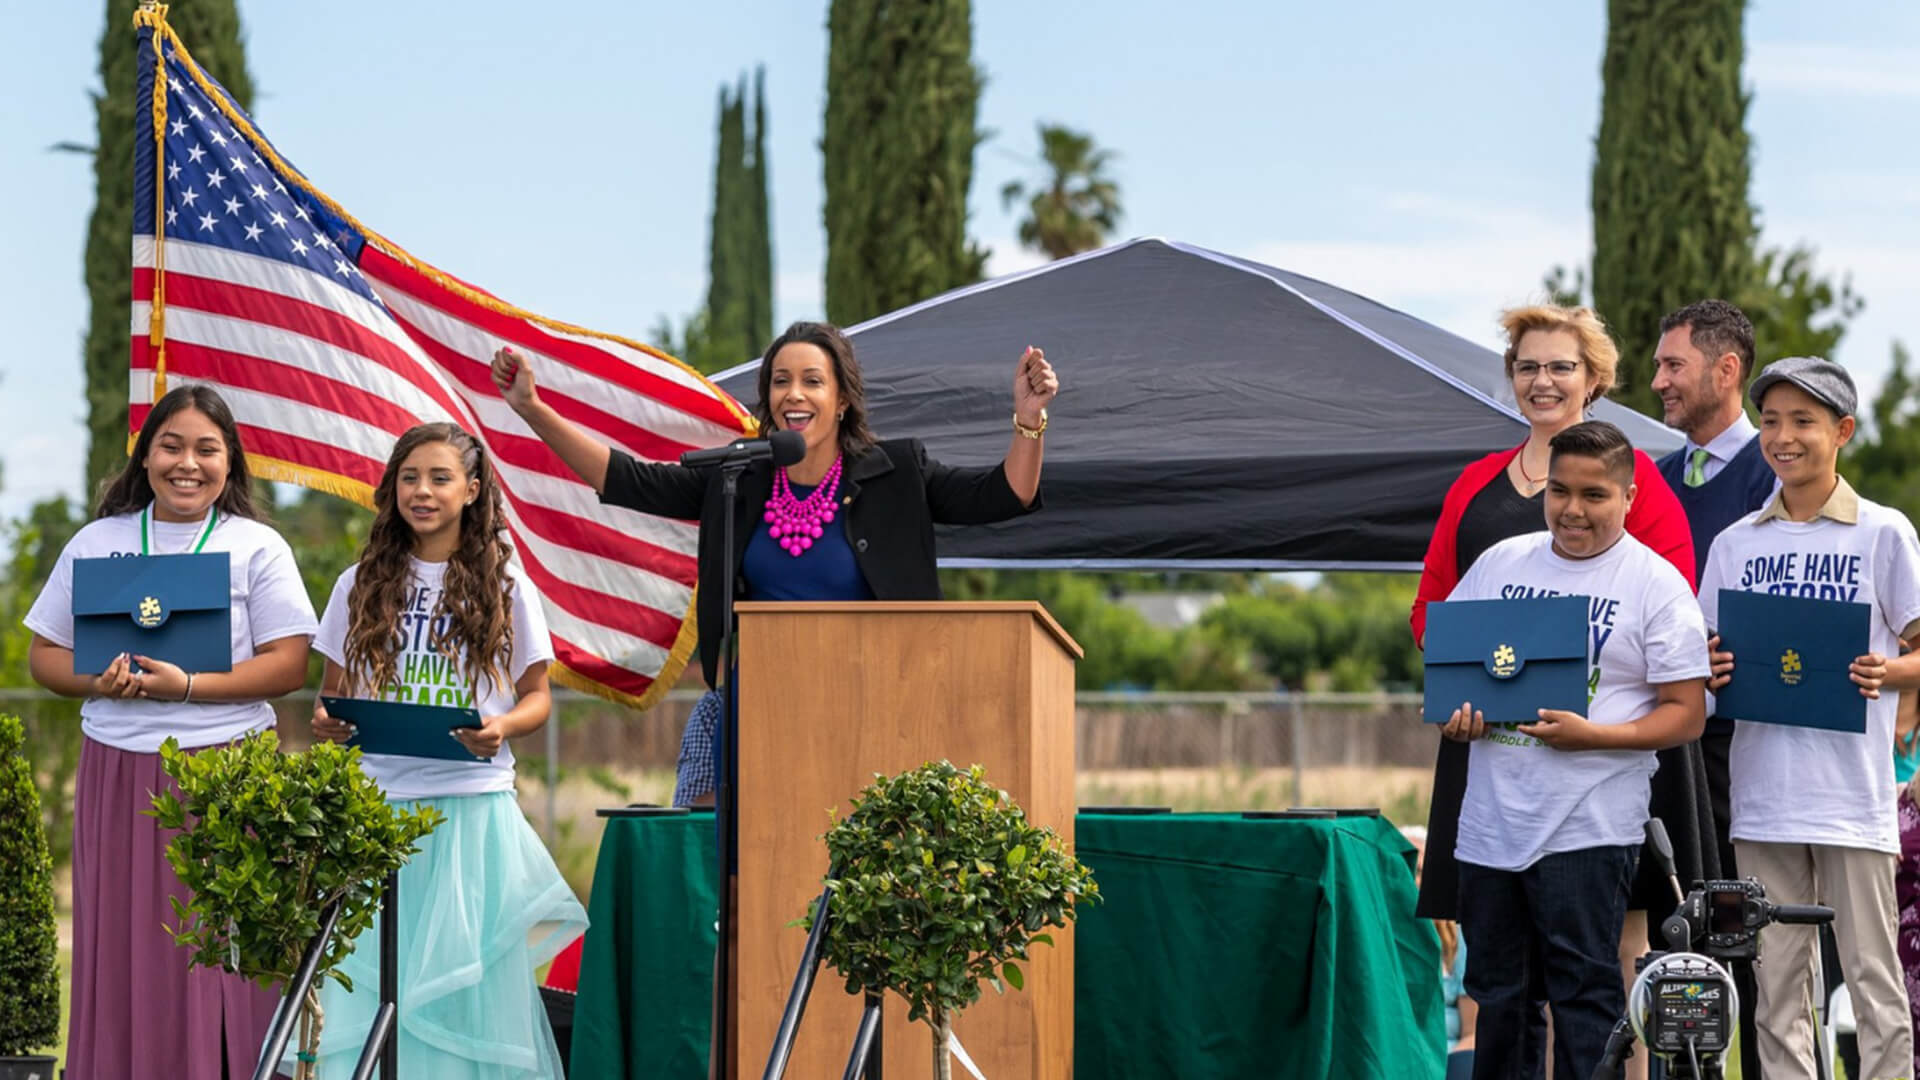 United Way Fresno and Madera Counties President and CEO Lindsay Fox cheers behind a podium on stage at an outdoor event. Smiling children stand on each side of her.